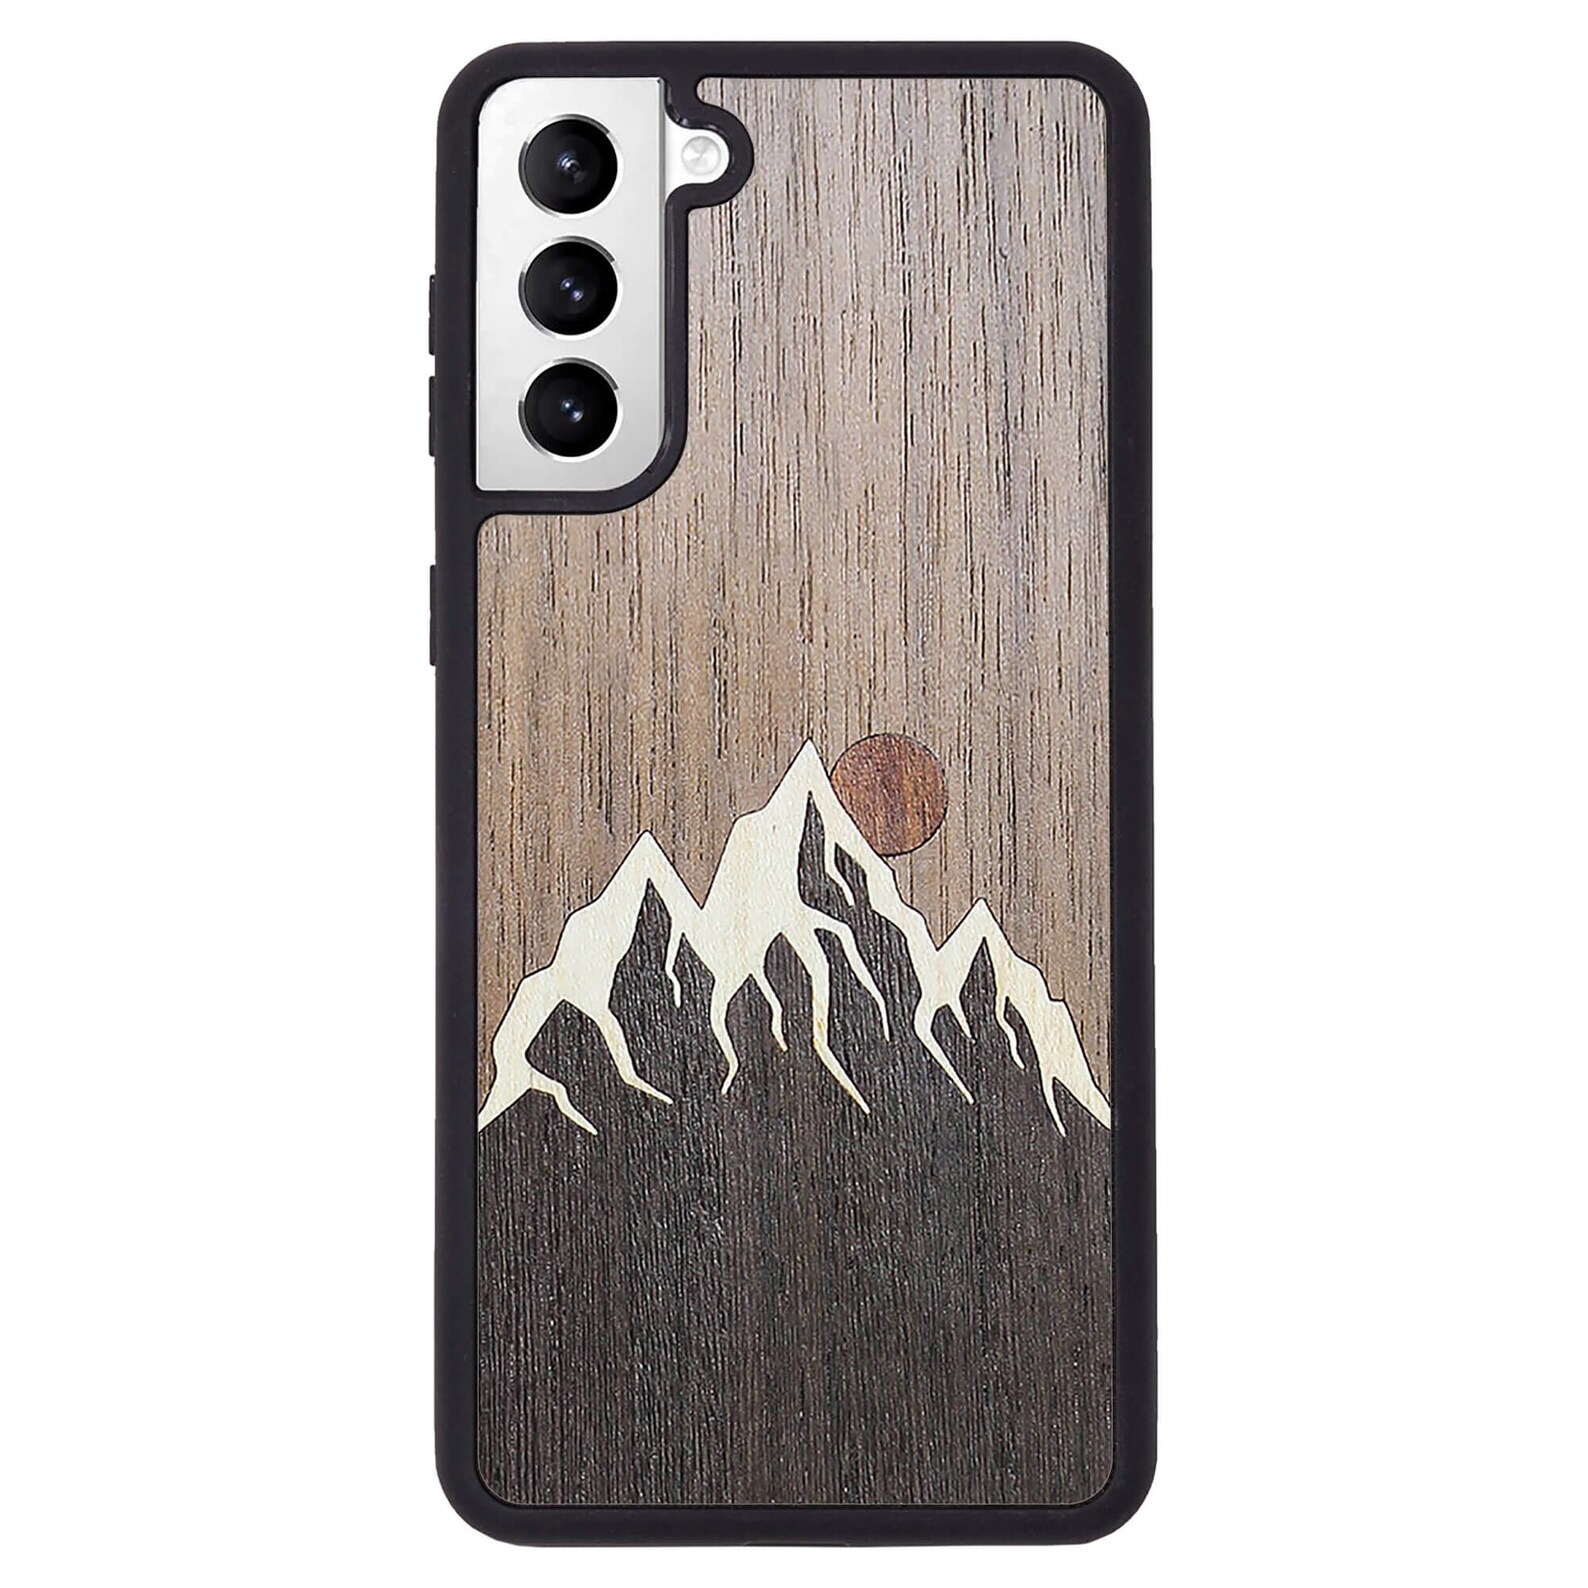 Mountain Wooden Phone Case Galaxy S21 Plus S20 FE Note 20 | Etsy